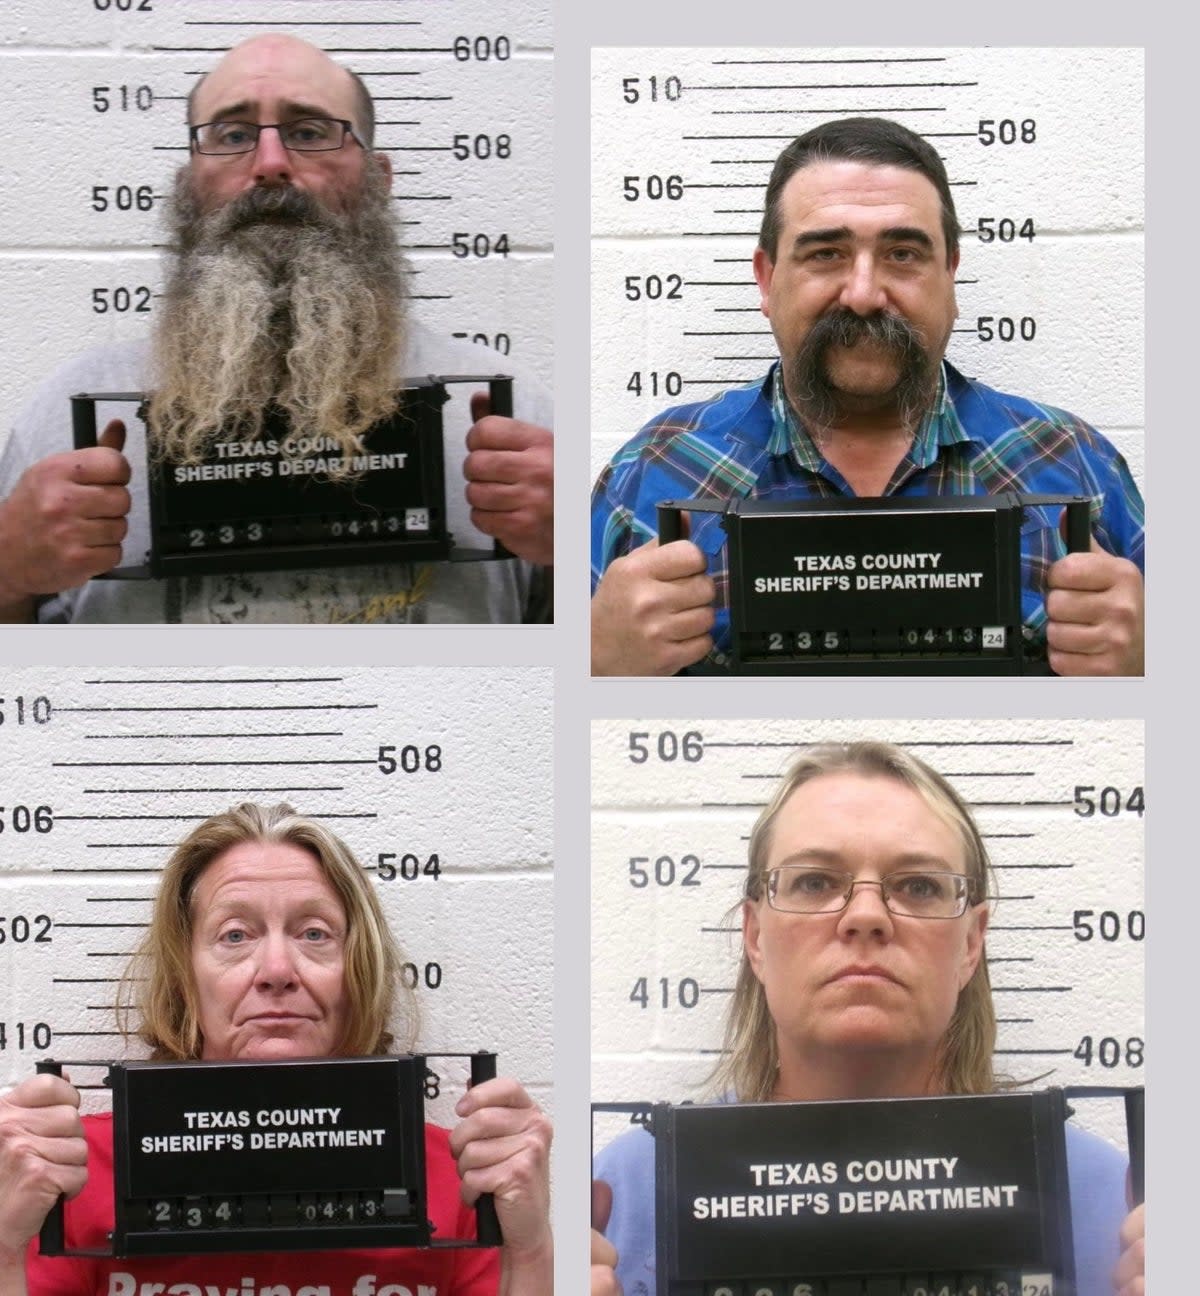 Tad Bert Cullum, 43, Tifany Machel Adams, 54, Cole Earl Twombly, 50 and Cora Twombly were arrested and charged with murder in connection with the disappearance of Veronica Butler, 27, and Jilian Kelley, 39 (Texas County Sheriff’s Department)